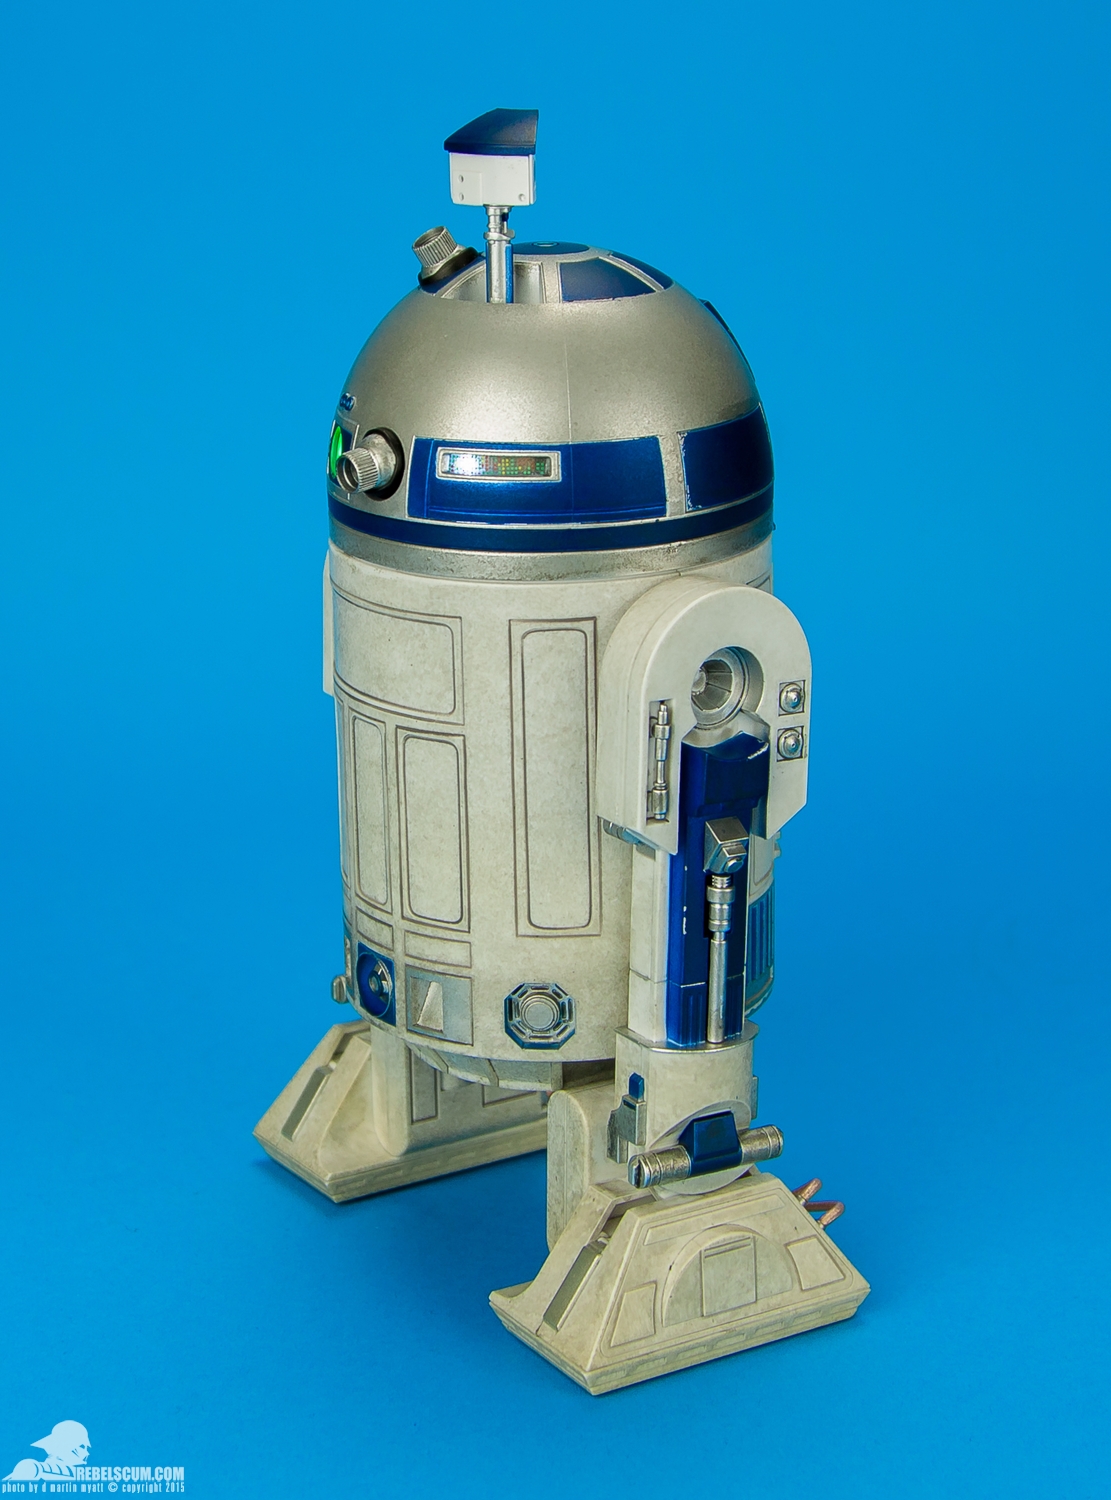 Sideshow-Collectibles-R2-D2-Sixth-Scale-Figure-Review-046.jpg